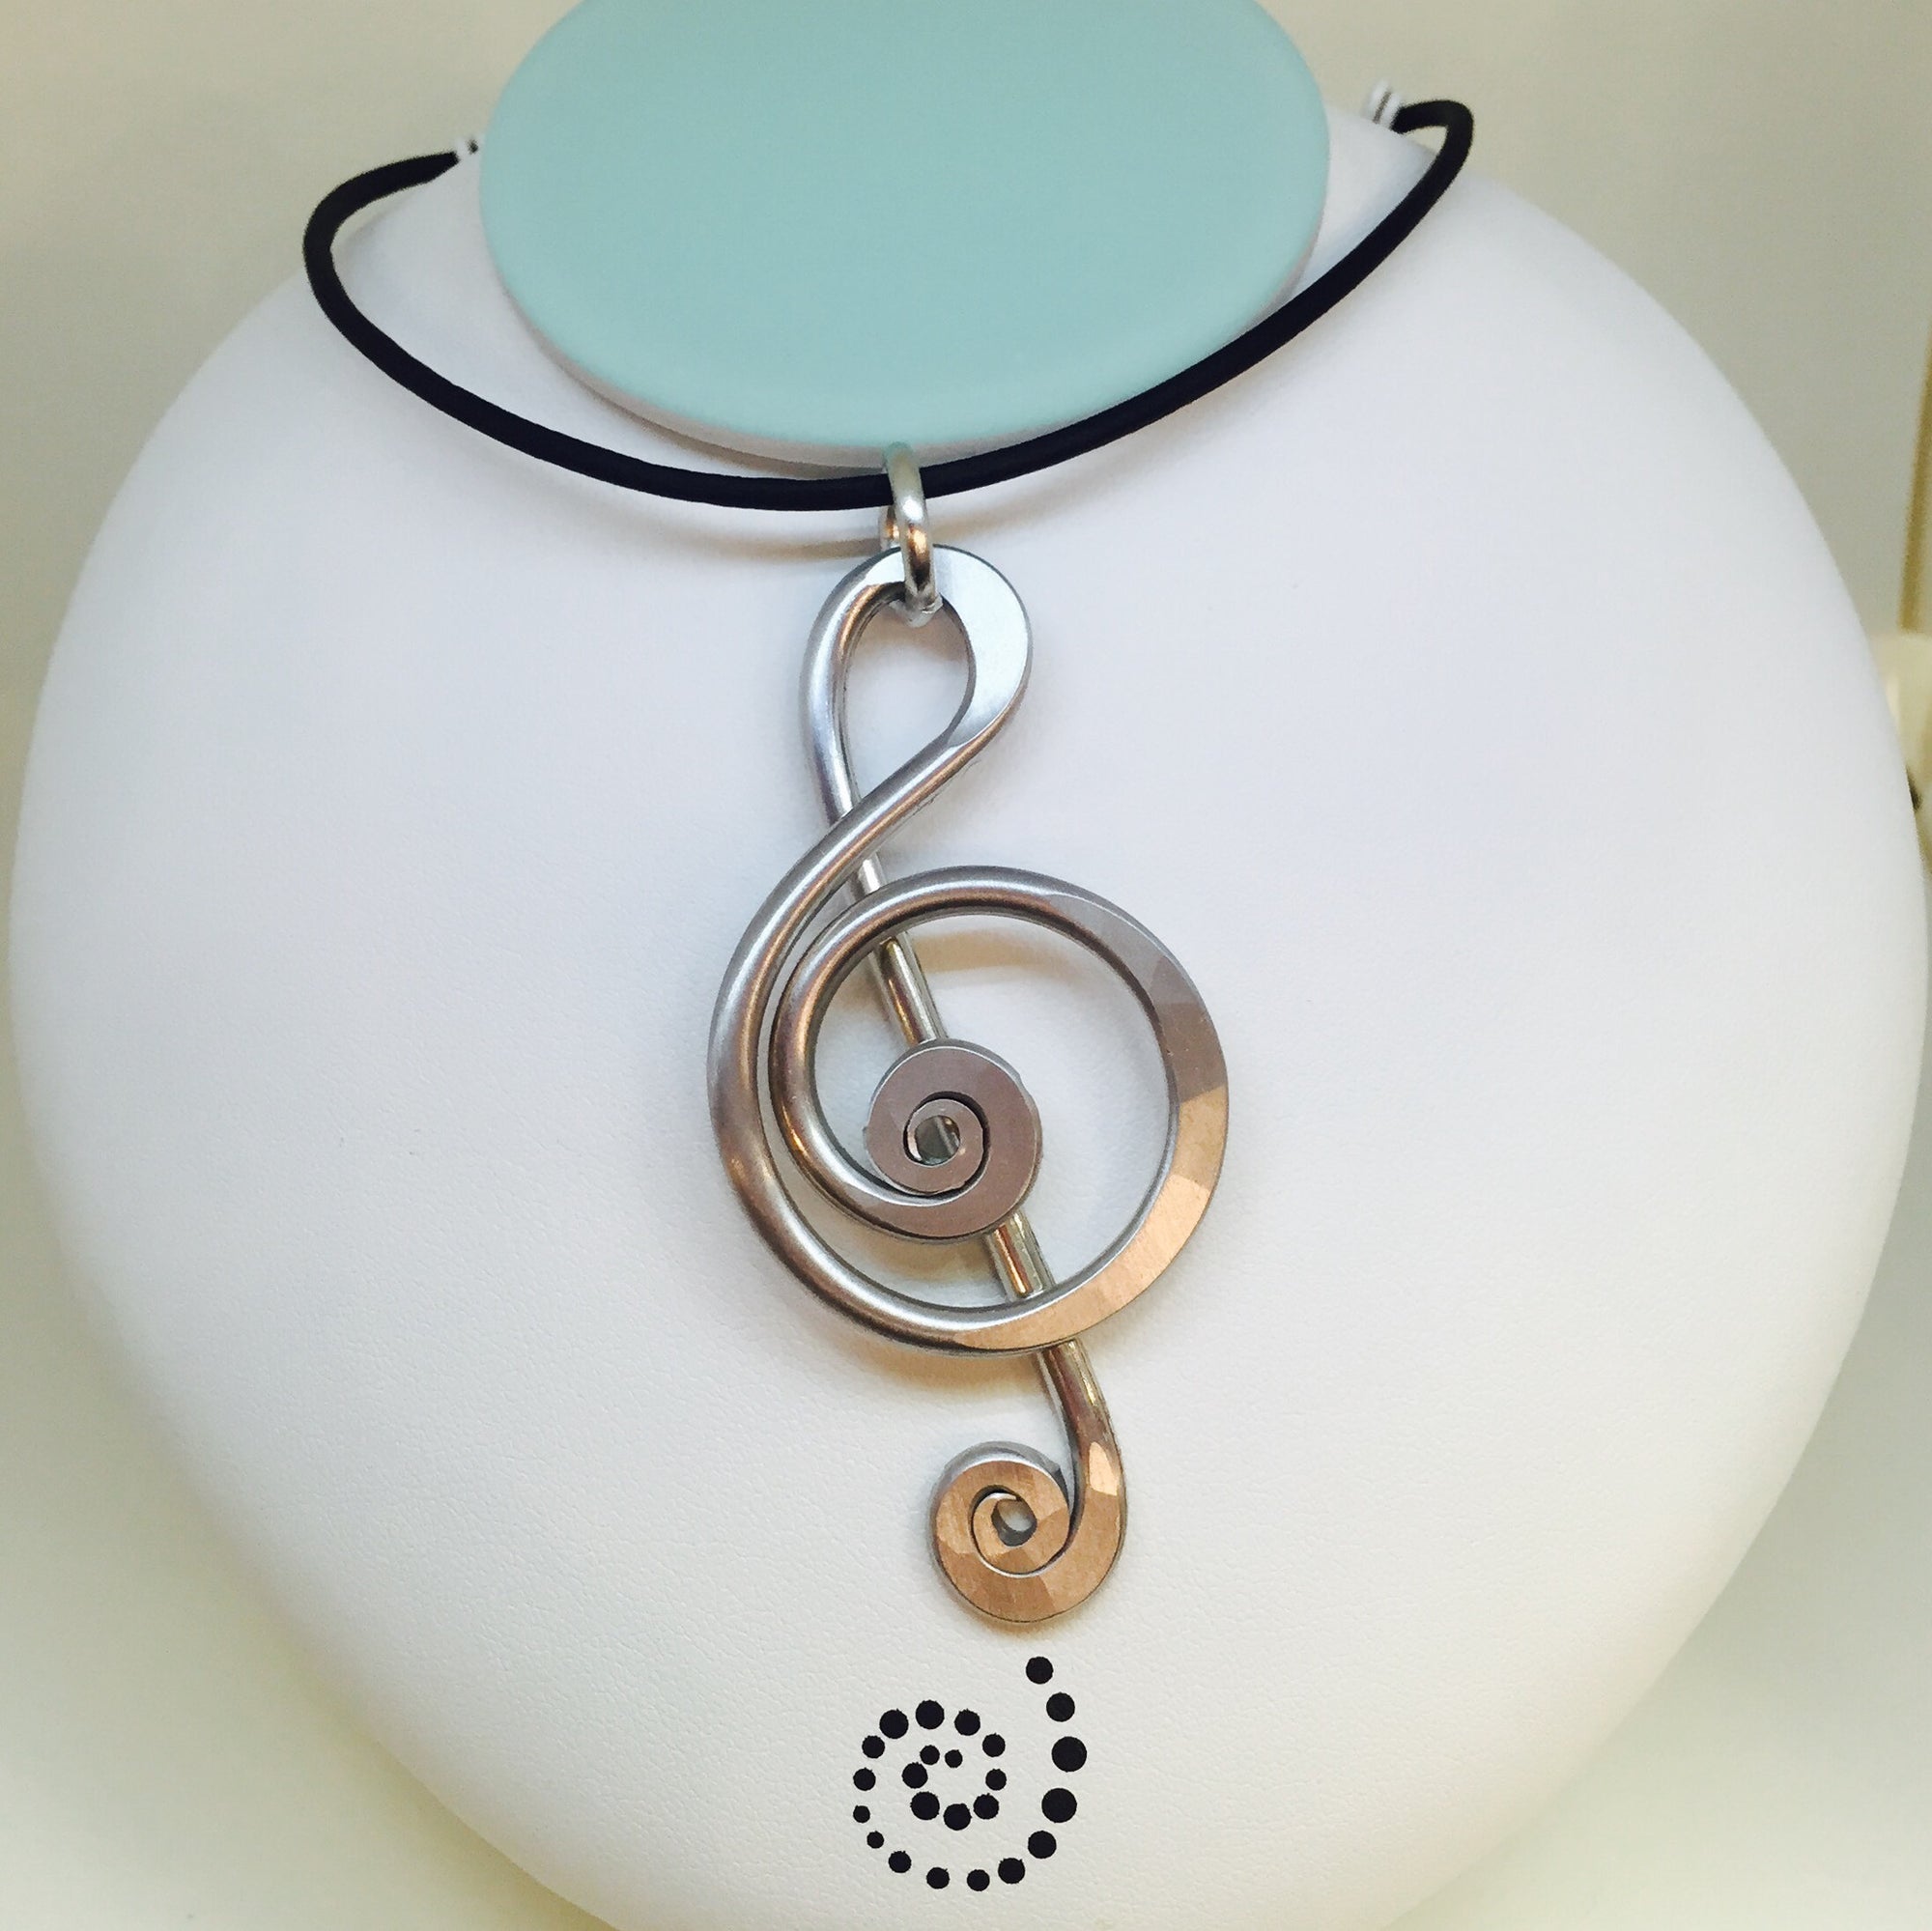 Music Note Necklace With Black Leather